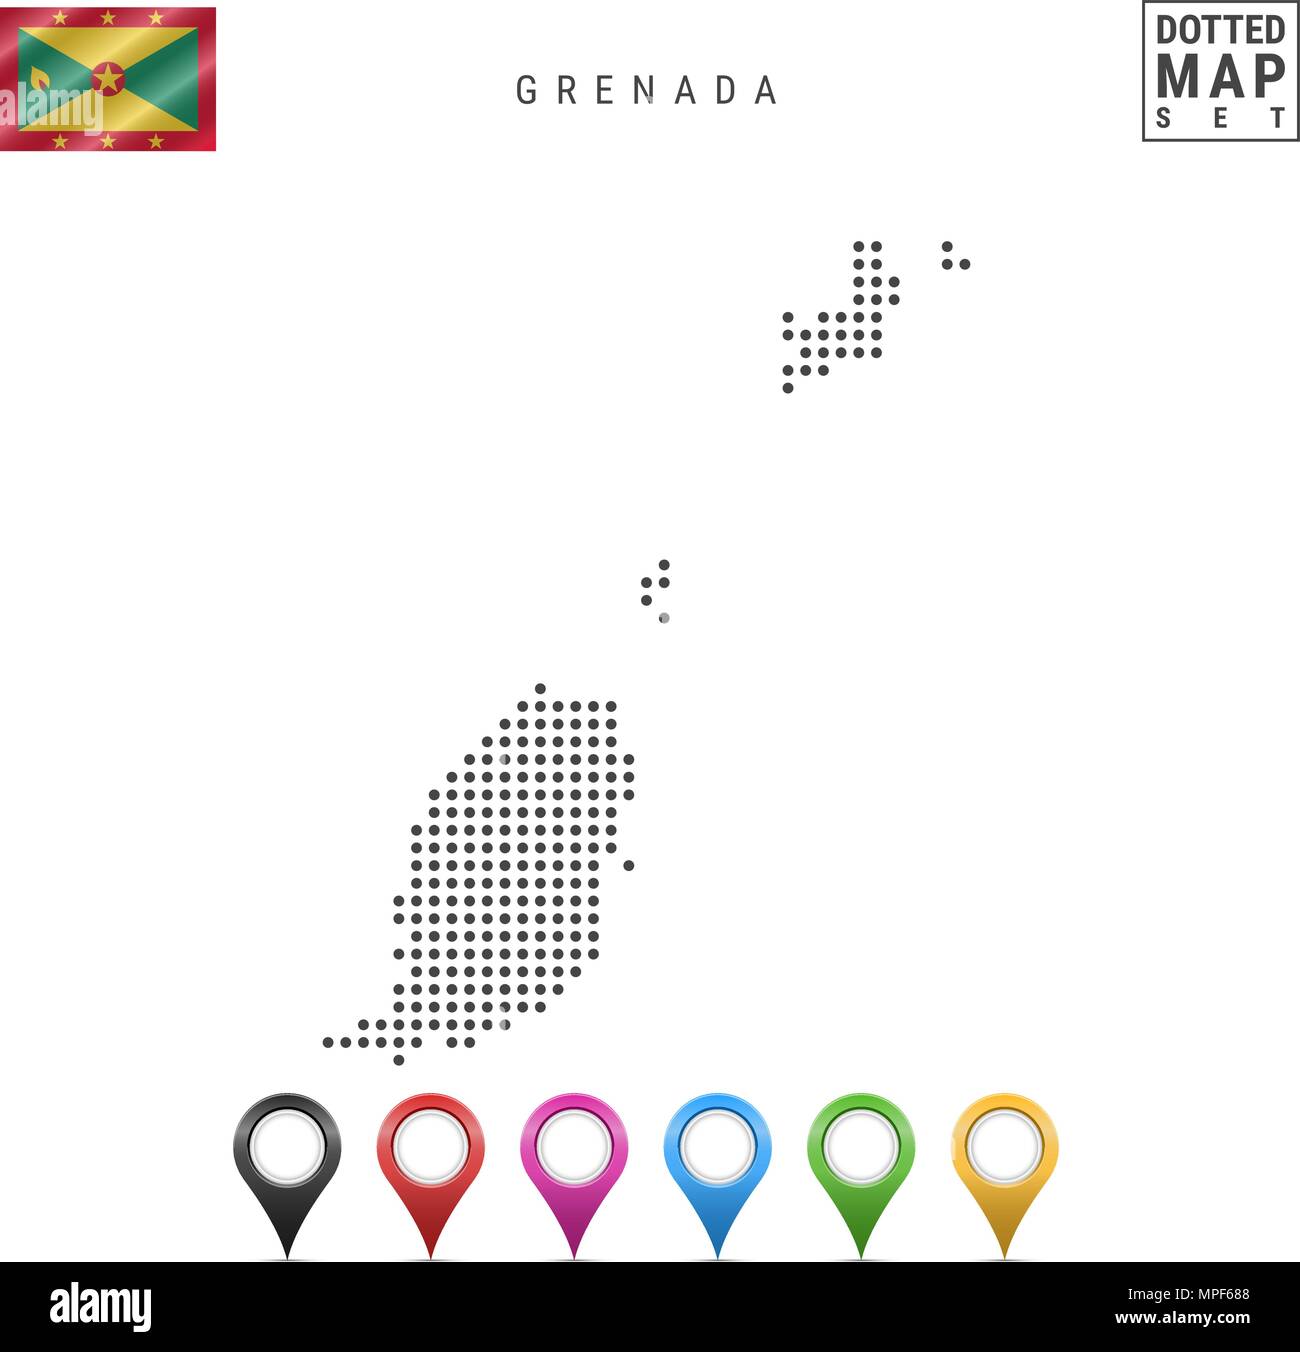 Vector Dotted Map of Grenada. Simple Silhouette of Grenada. National Flag of Grenada. Set of Multicolored Map Markers Stock Vector